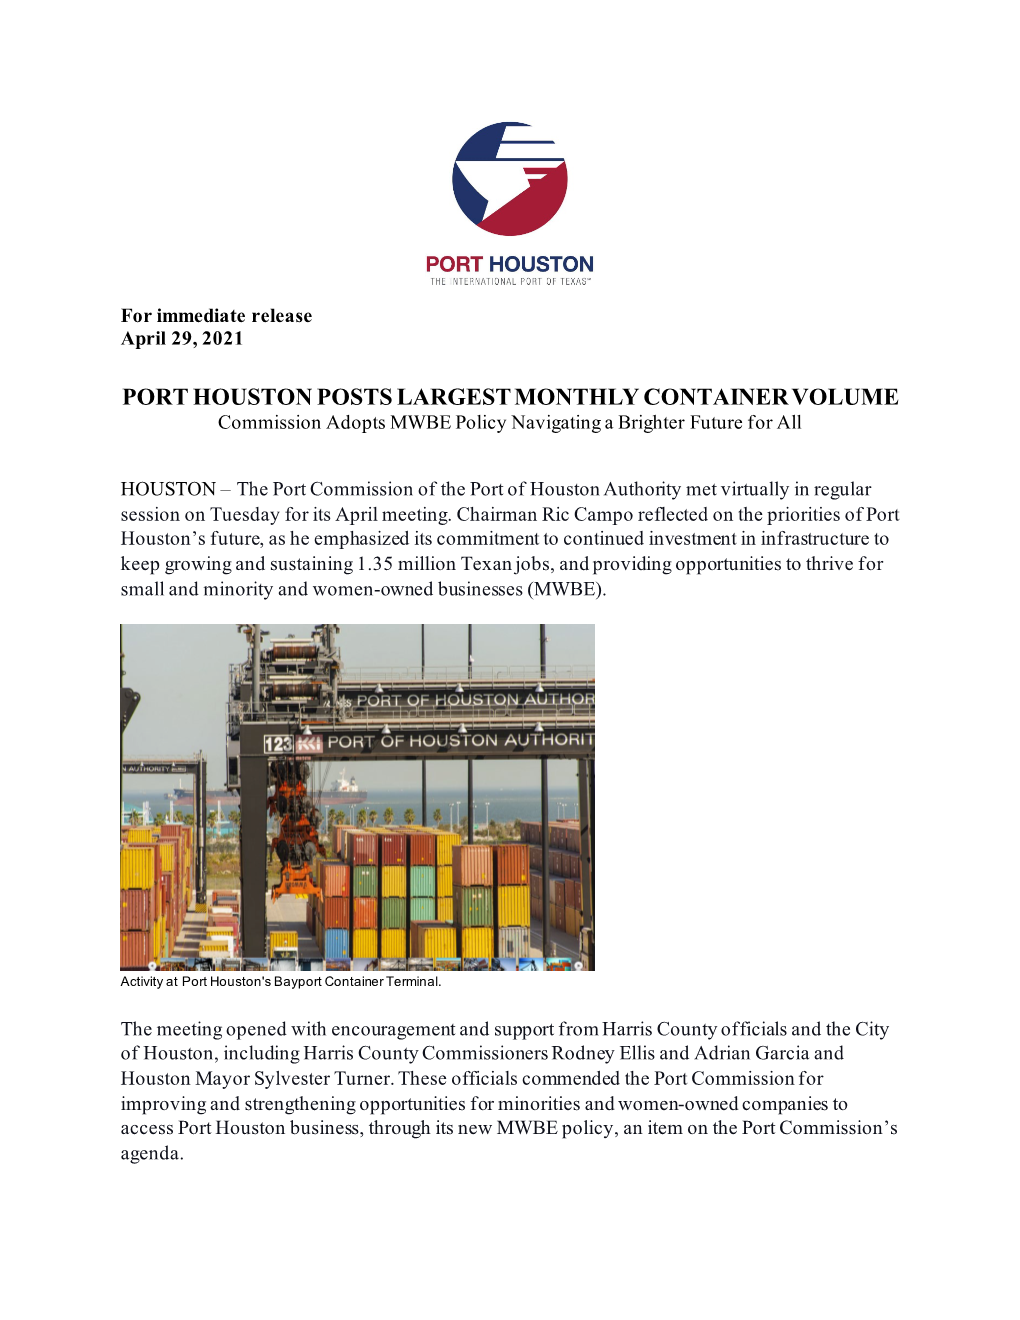 April 29, 2021 – Port Houston Posts Largest Monthly Container Volume